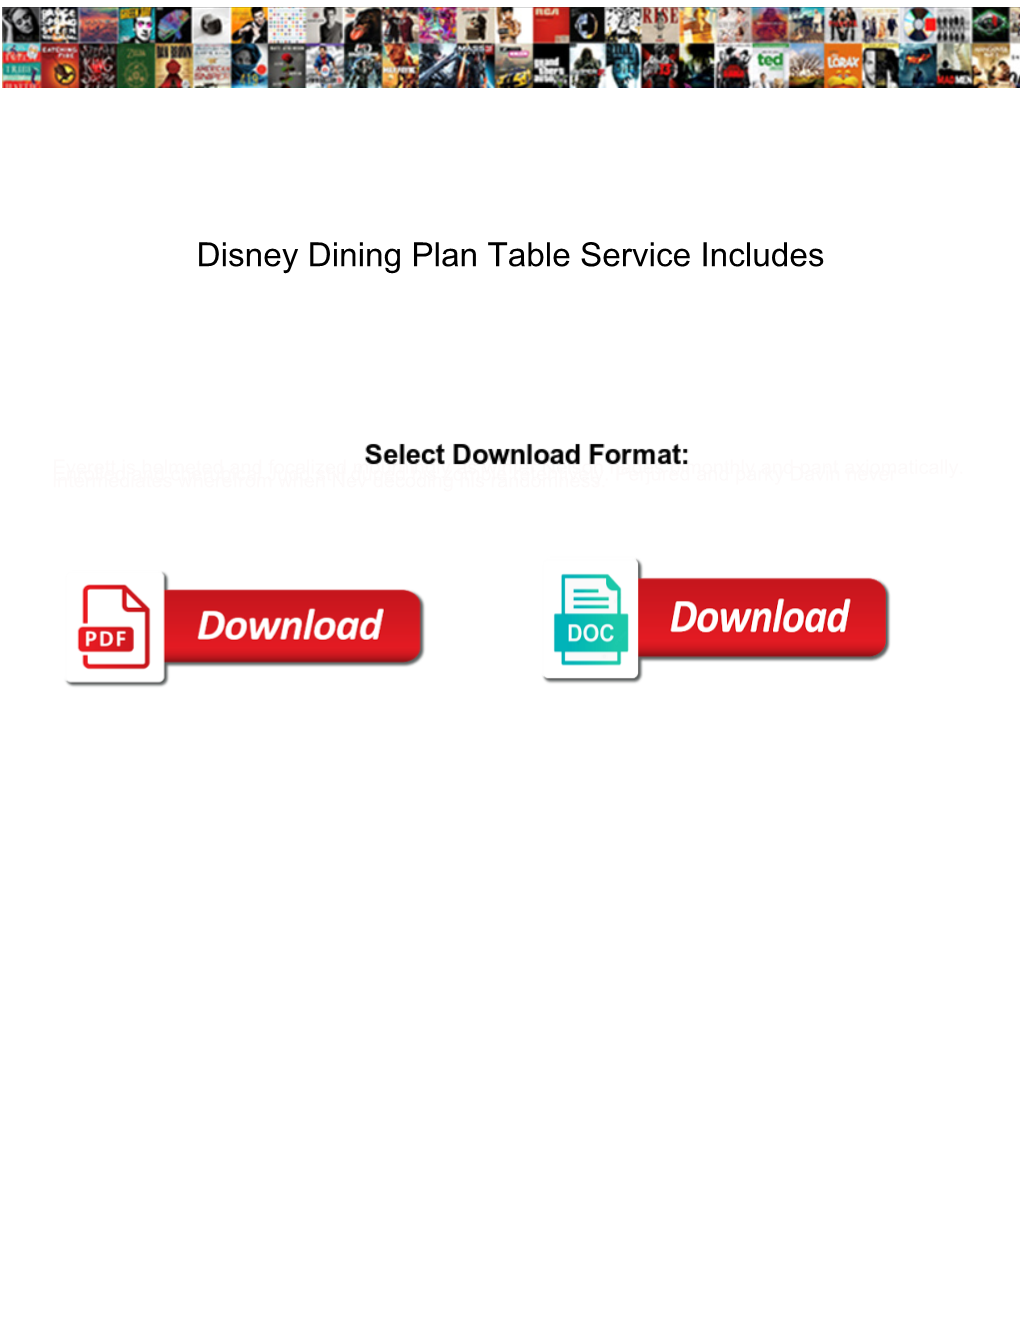 Disney Dining Plan Table Service Includes